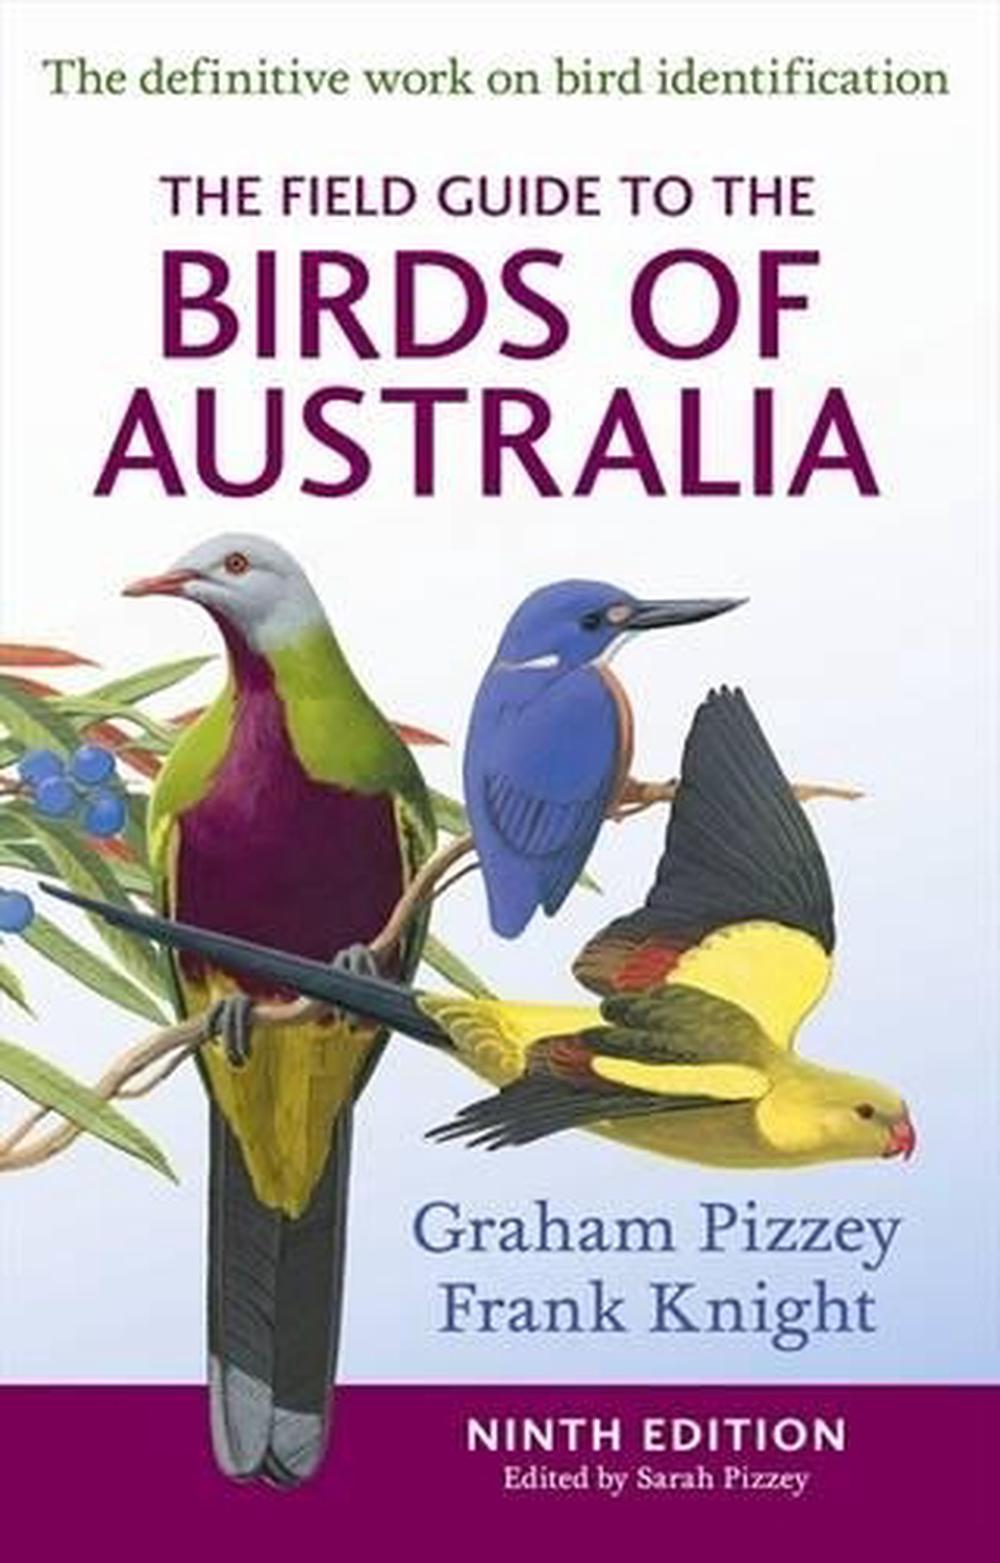 the-field-guide-to-the-birds-of-australia-by-graham-pizzey-paperback